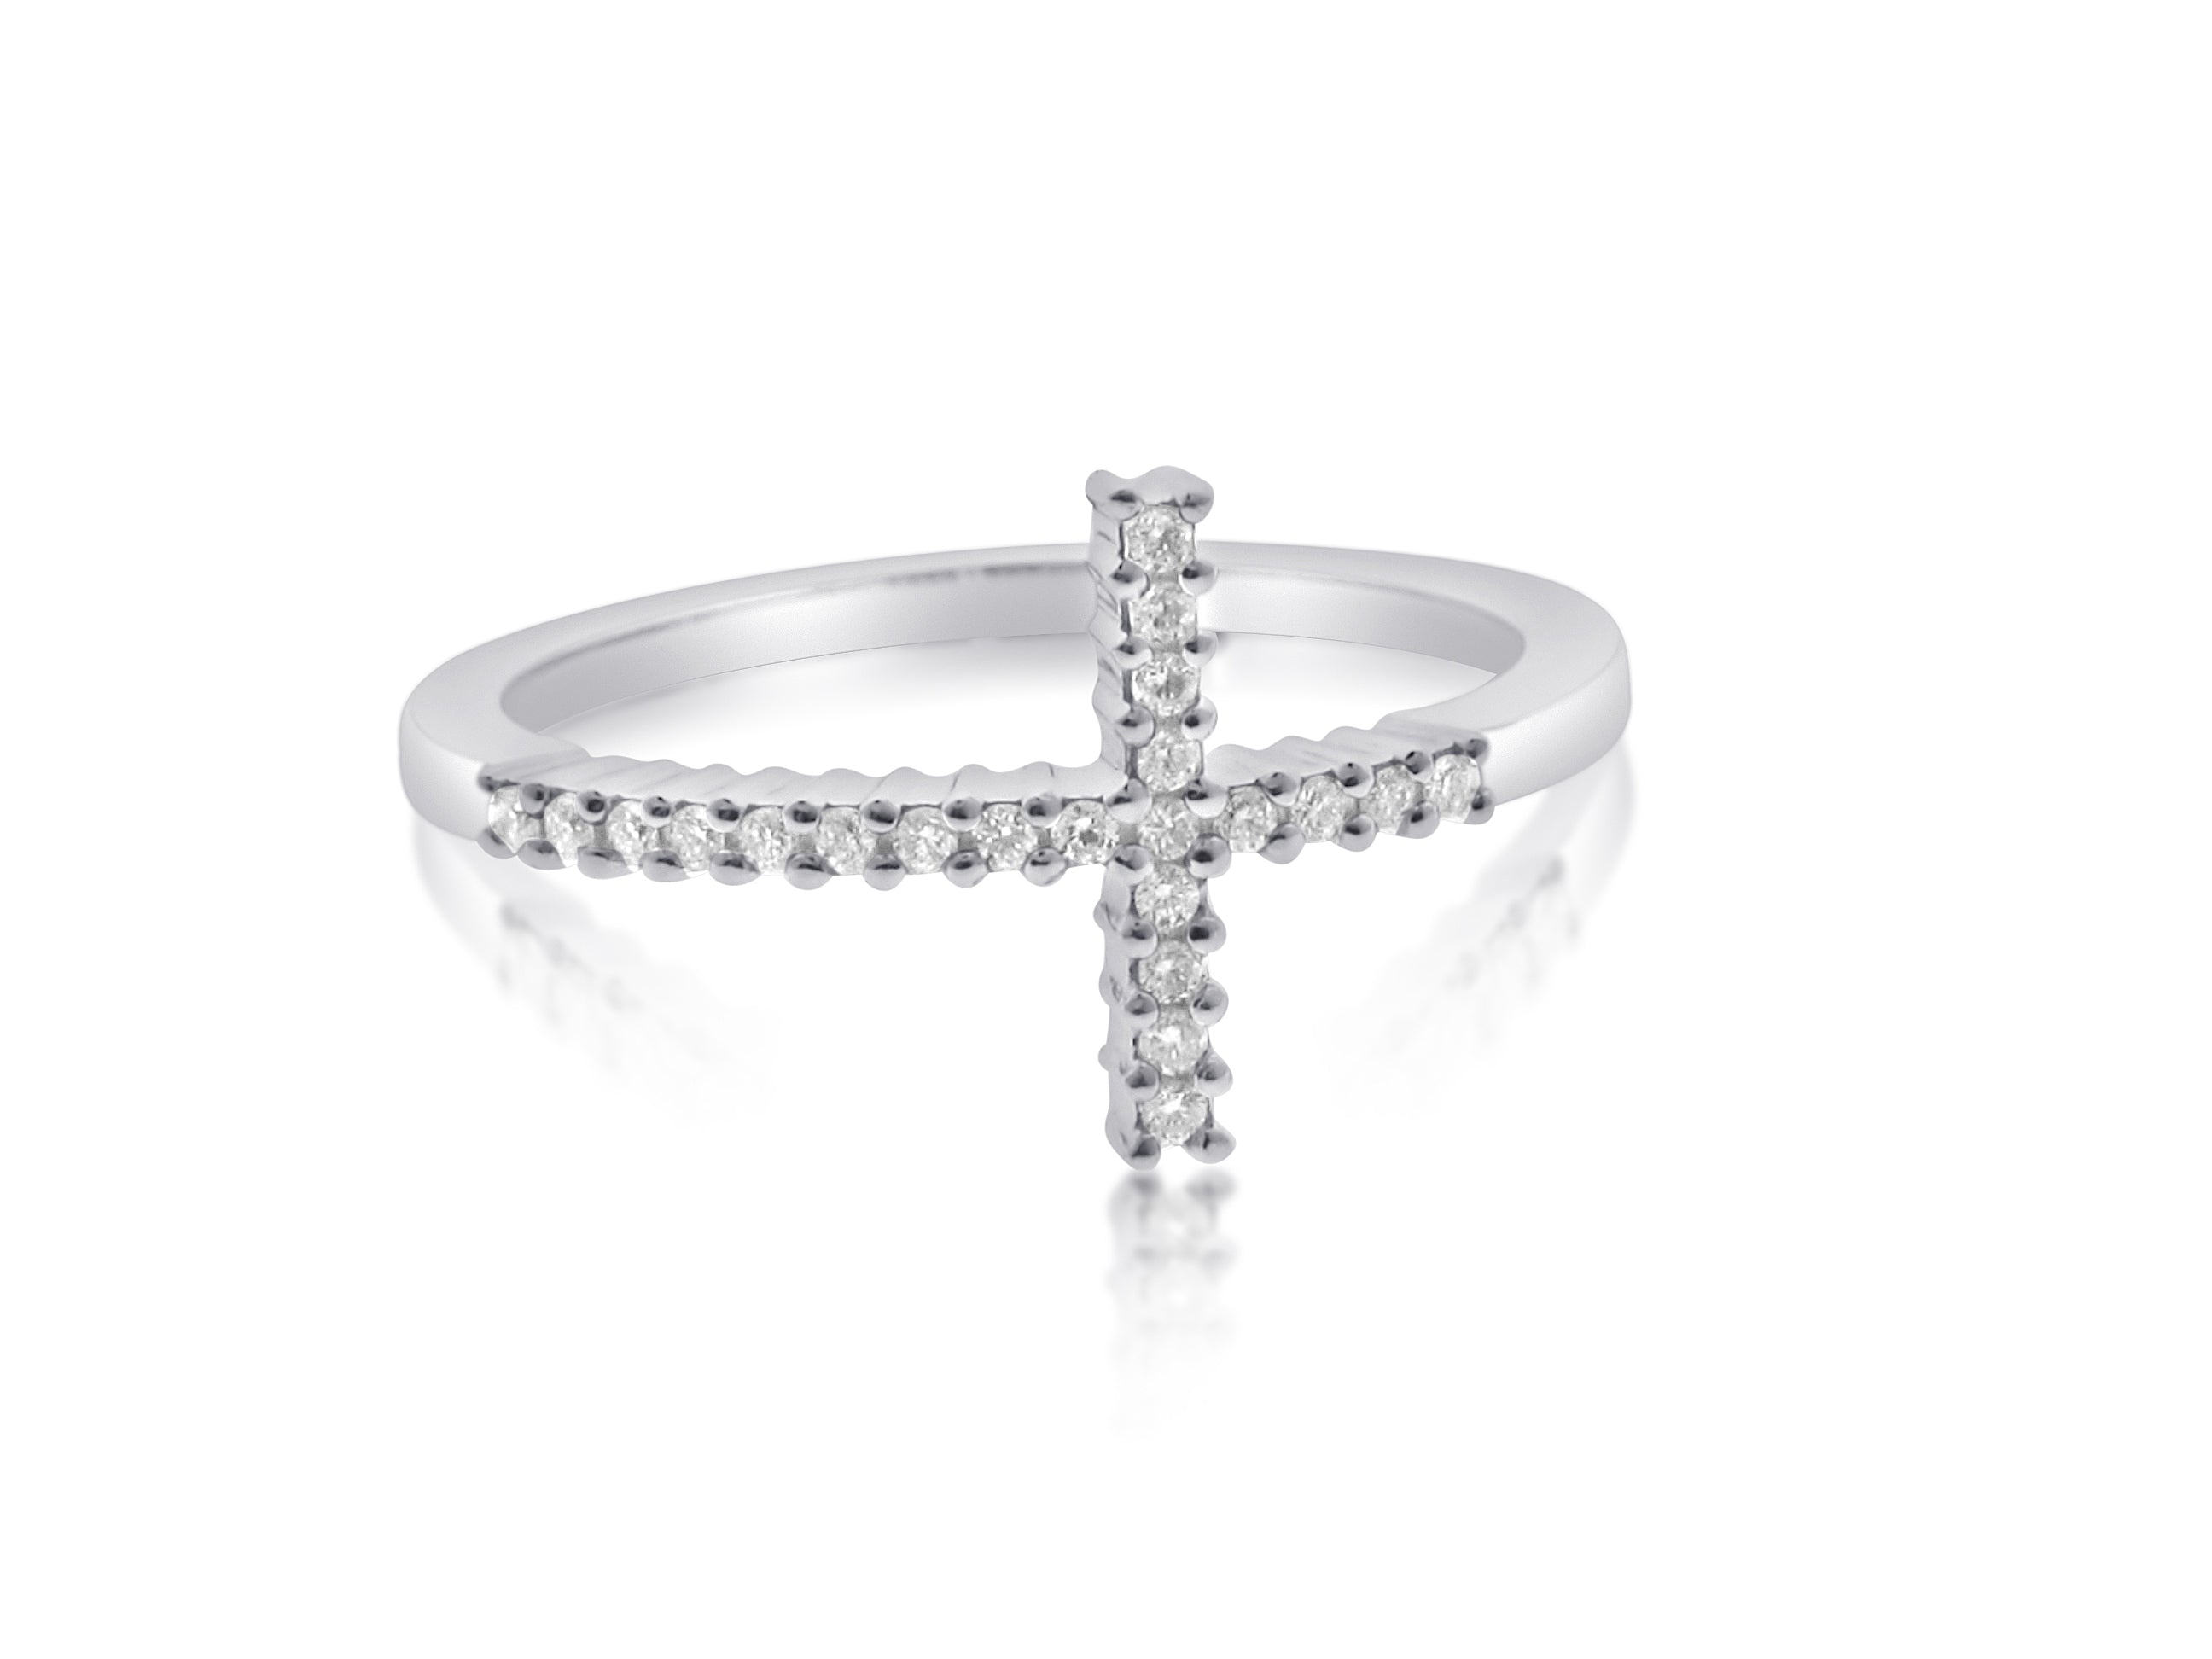 ROBERTO COIN 18K WHITE GOLD 0.11CT DIAMOND SIDEWAYS CROSS RING FROM THE DIAMOND COLLECTION